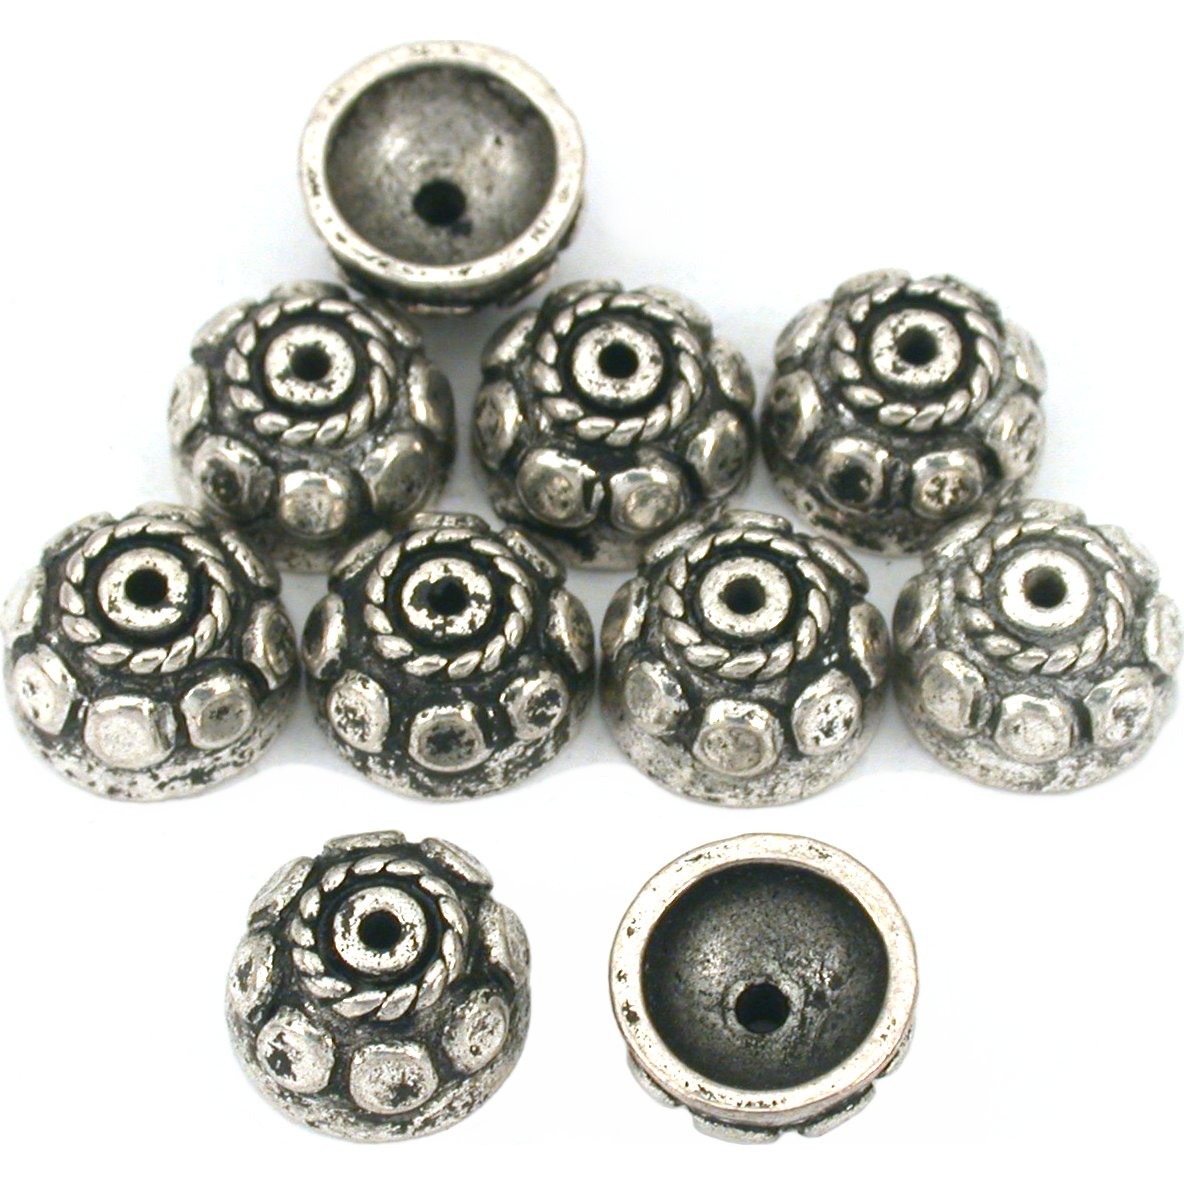 Bali Bead Caps Antique Silver Plated 9.5mm 10Pcs Approx.